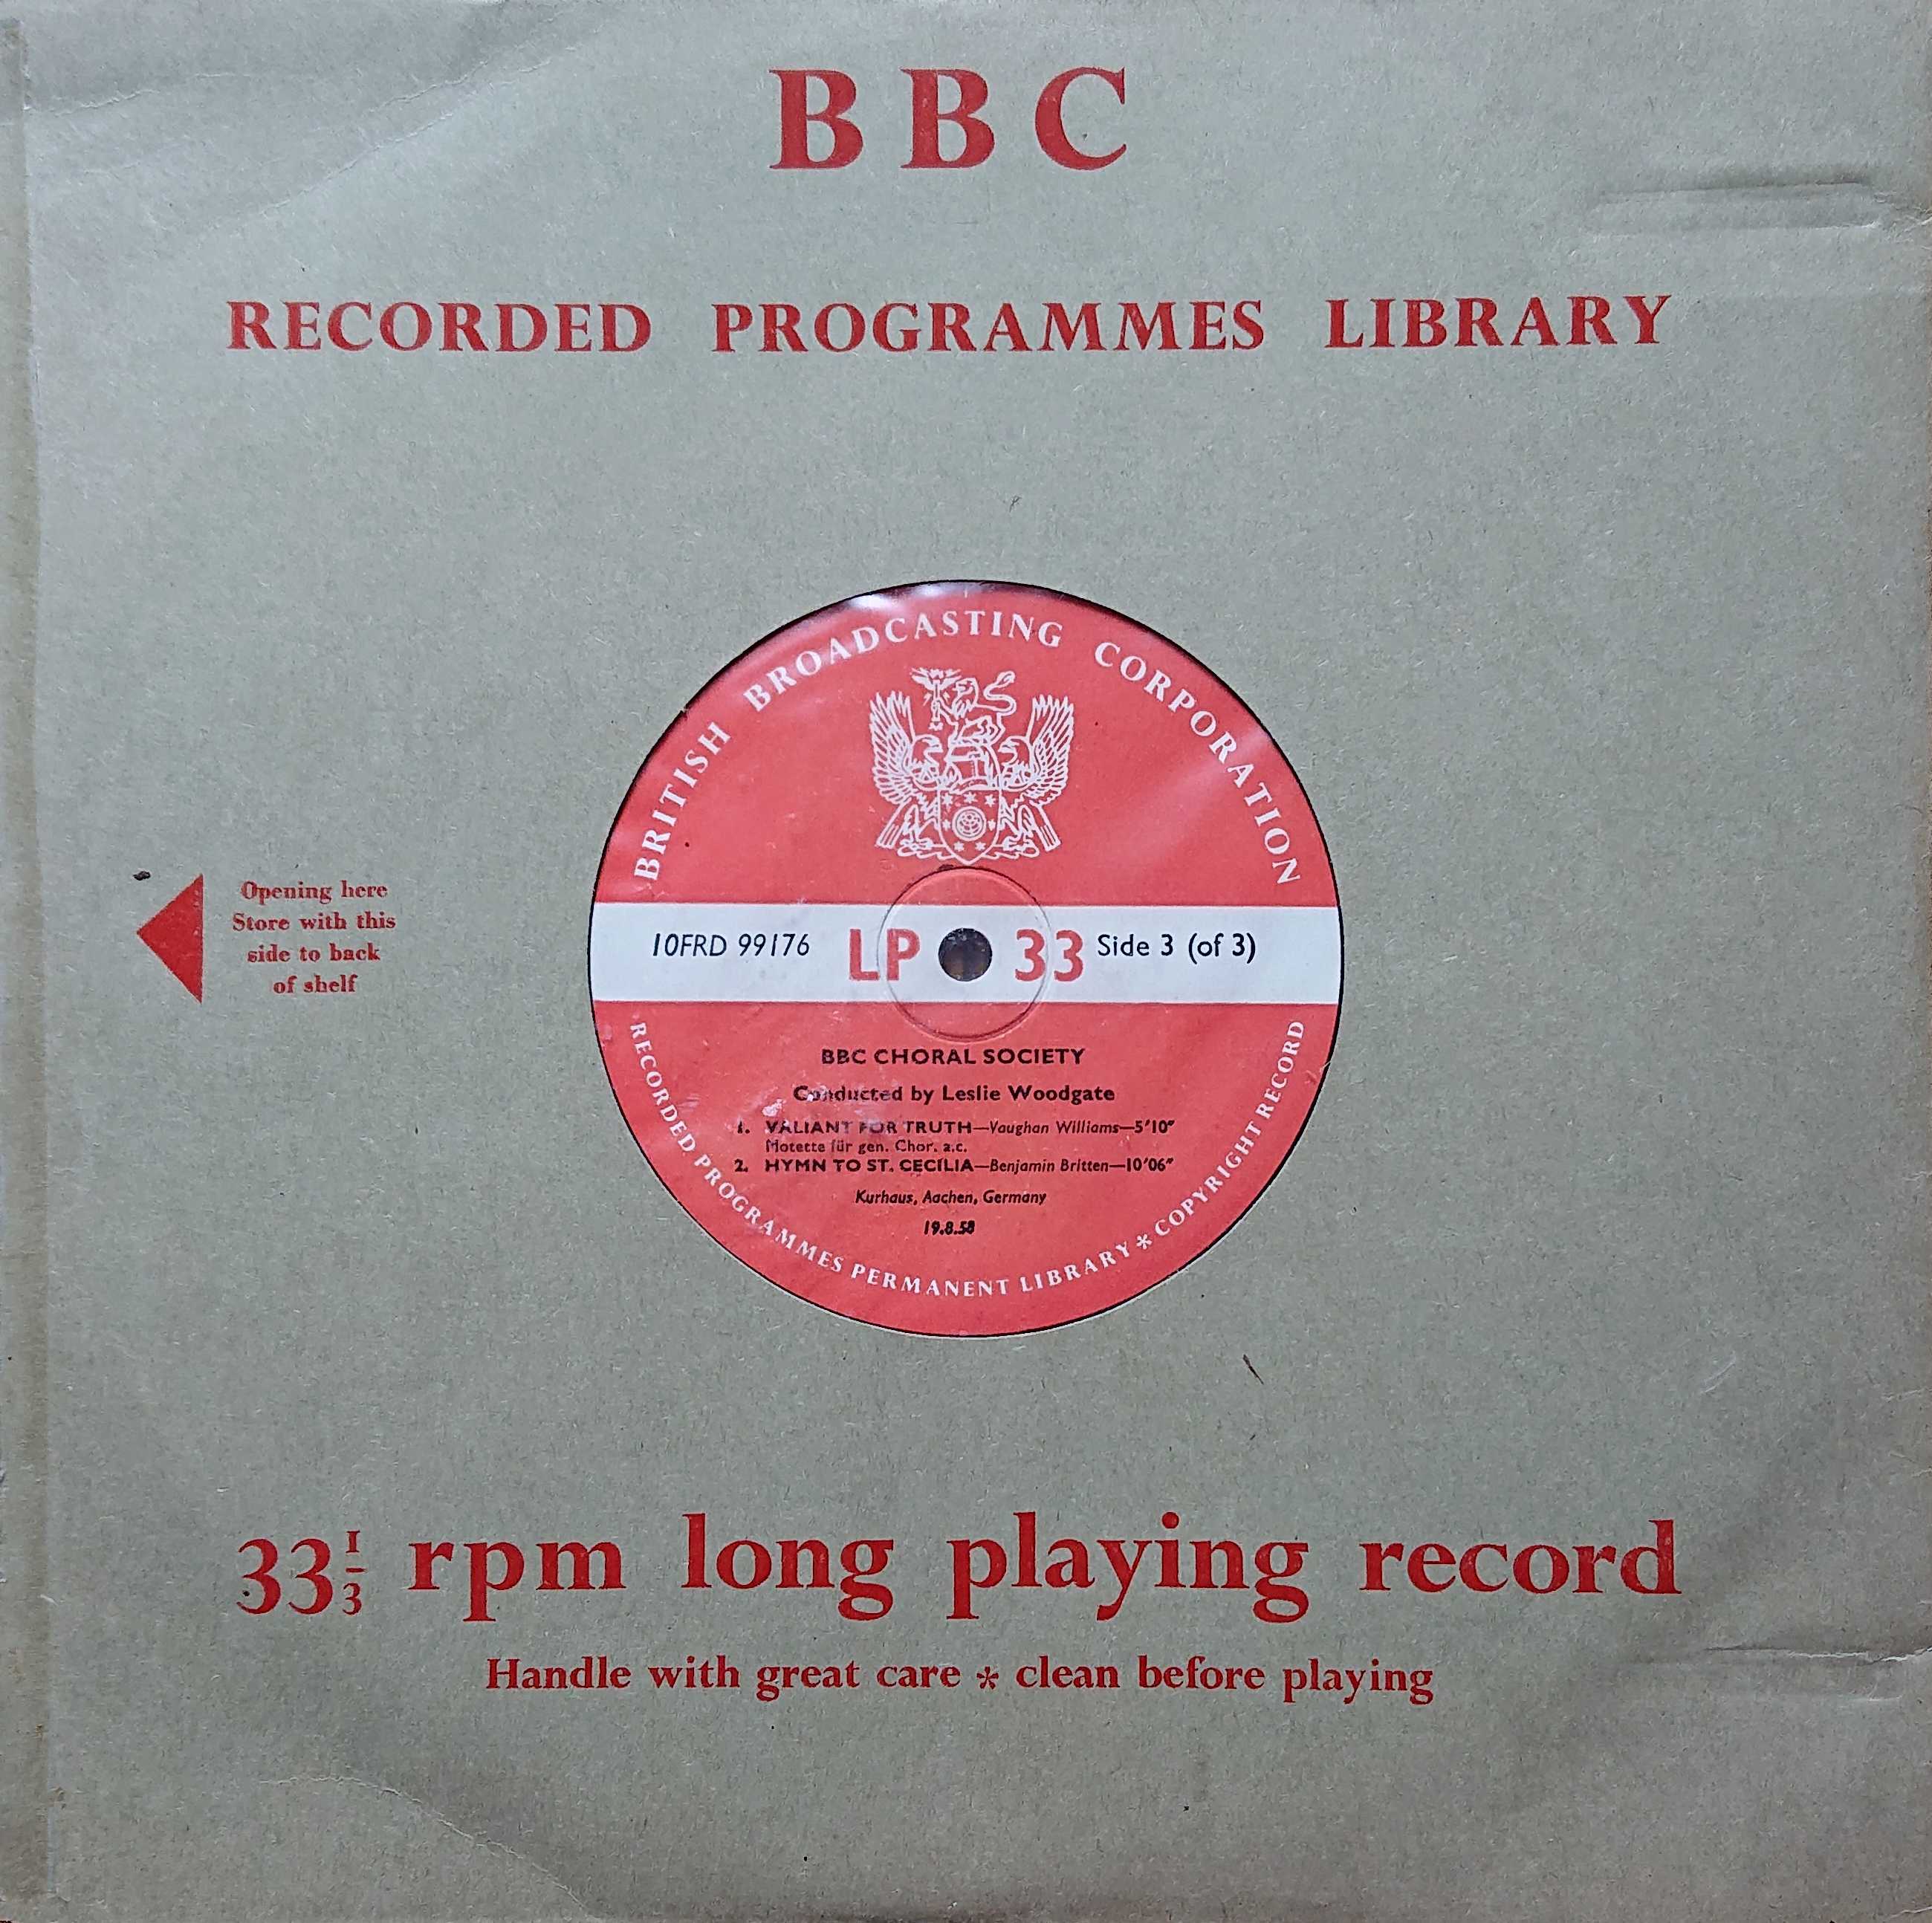 Picture of 10FRD 99176 BBC Choral Society by artist Vaughan Williams / Benjamin Britten from the BBC 10inches - Records and Tapes library